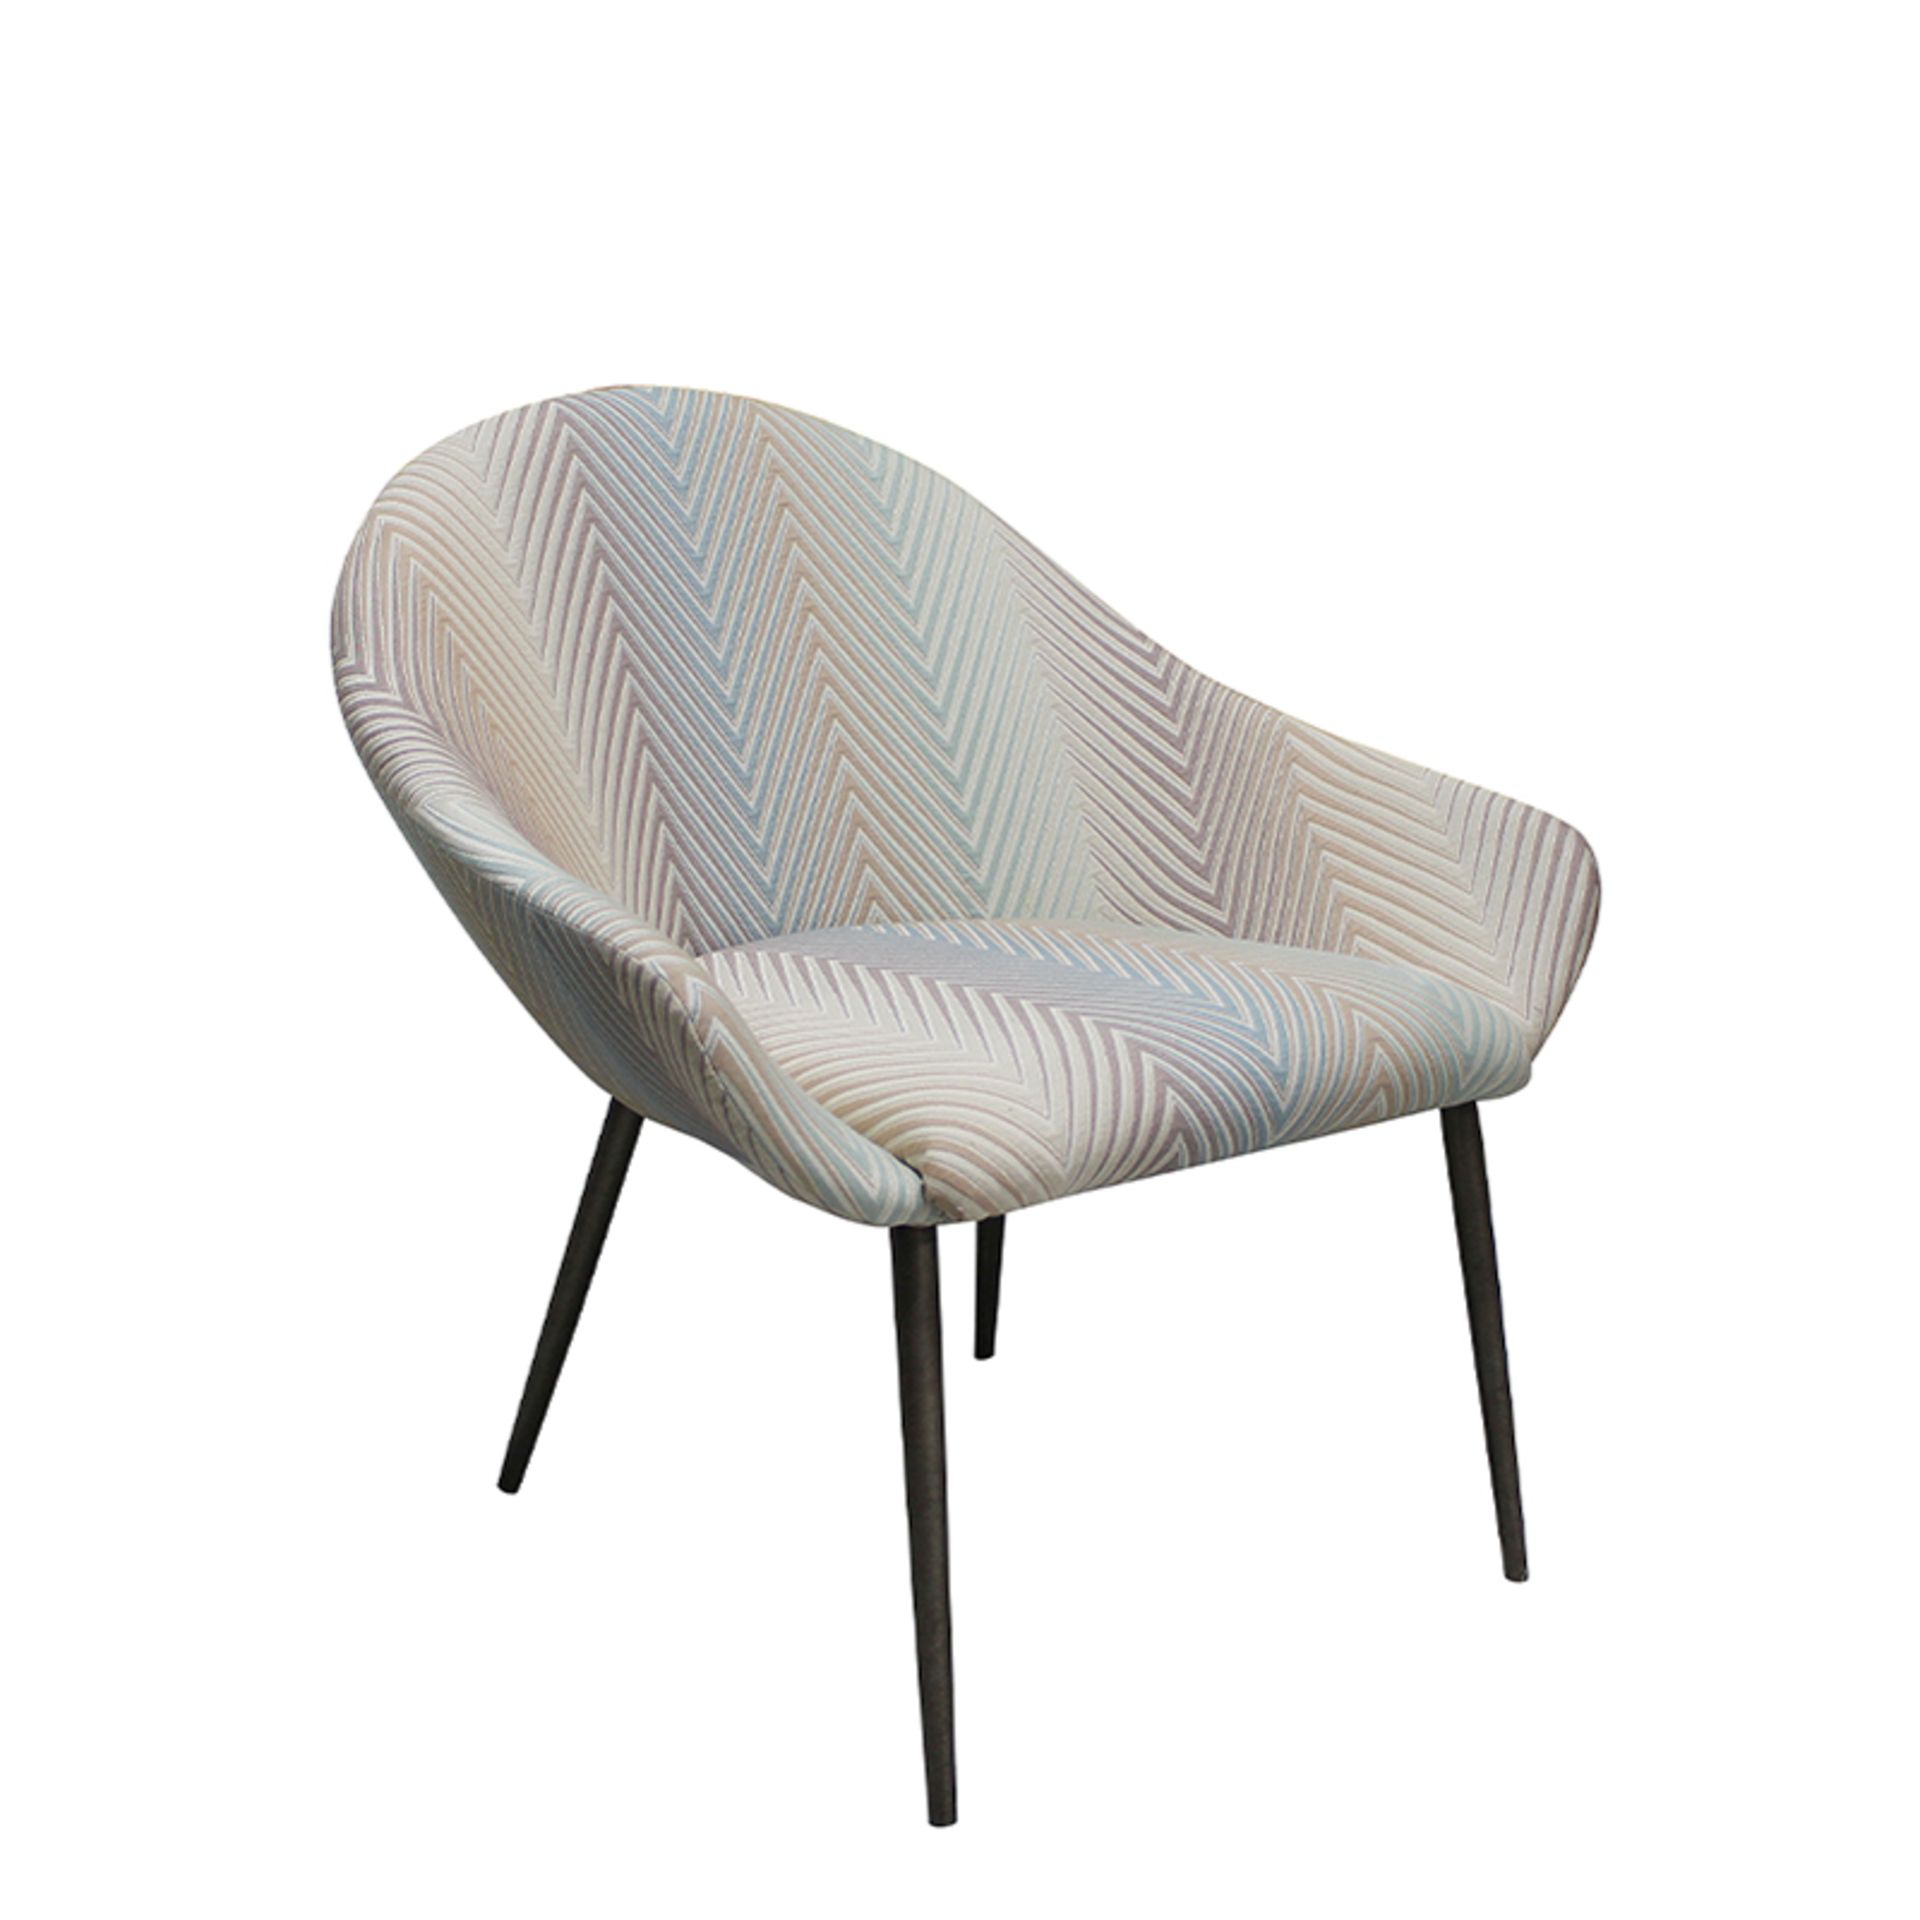 Provence Lounge Chair Upholstered in Herringbone spring Ordinary metal legs Size: 58 x 61 x 84 cm